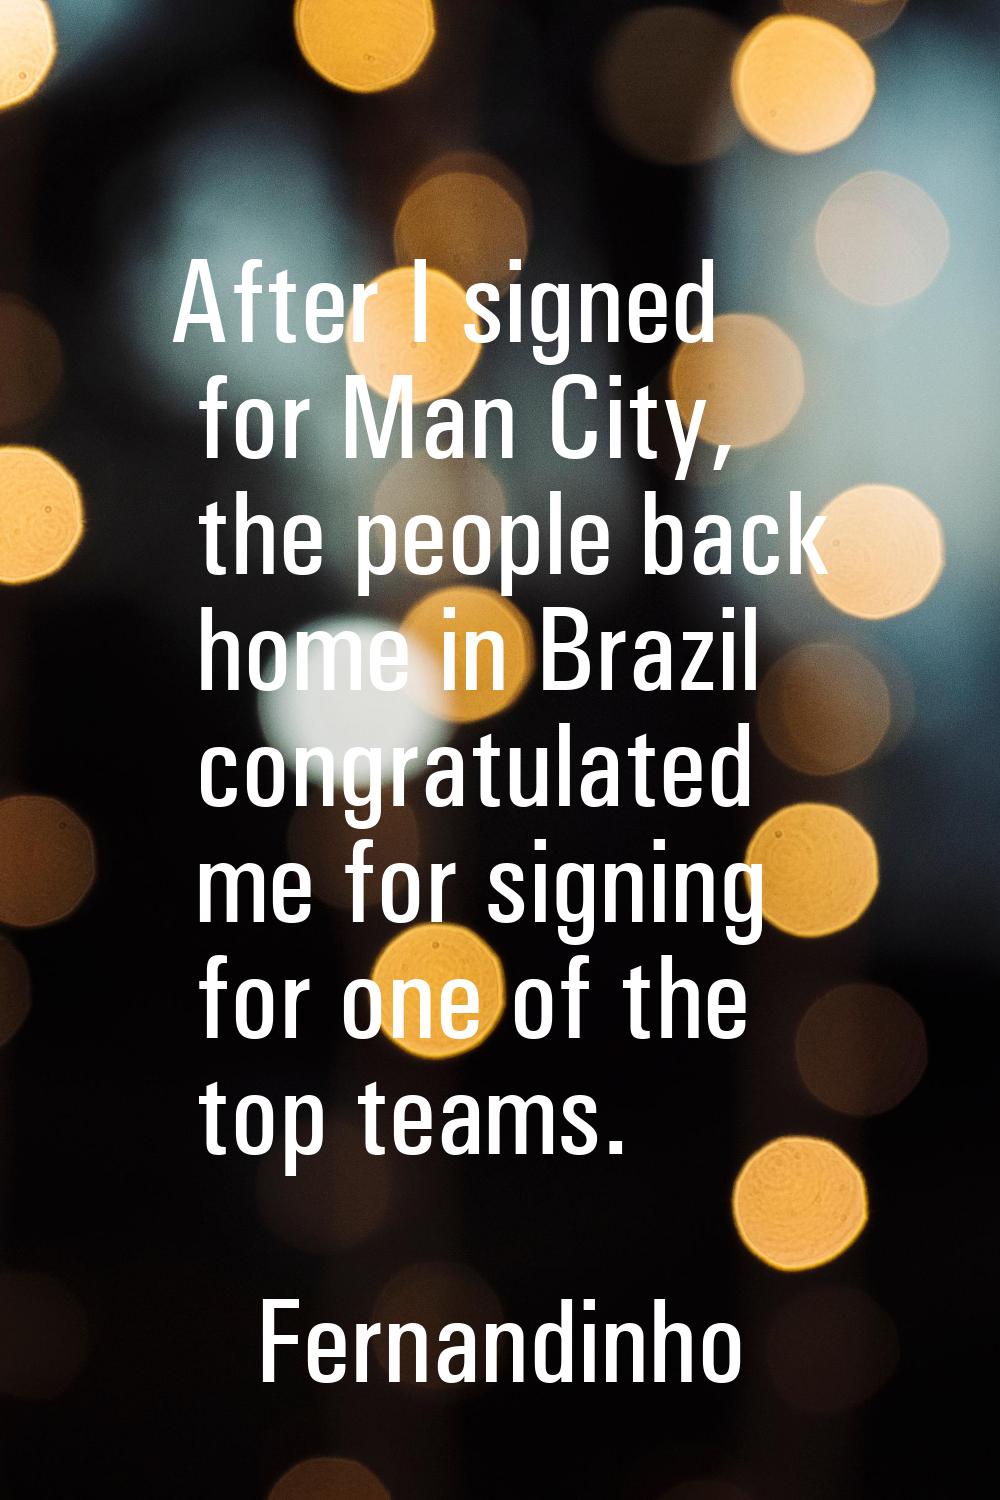 After I signed for Man City, the people back home in Brazil congratulated me for signing for one of